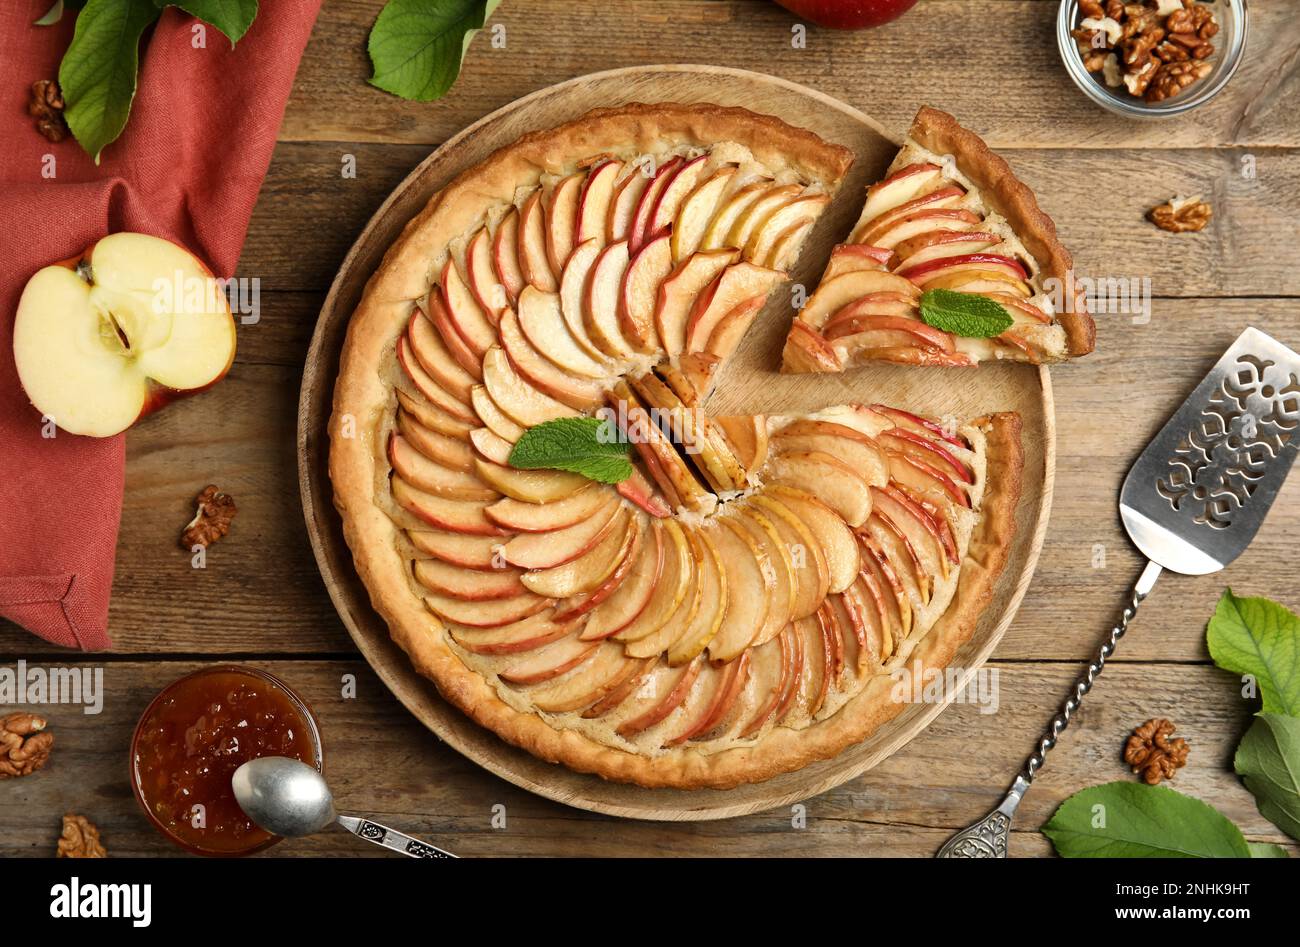 Delicious apple pie and ingredients on wooden table, flat lay Stock Photo